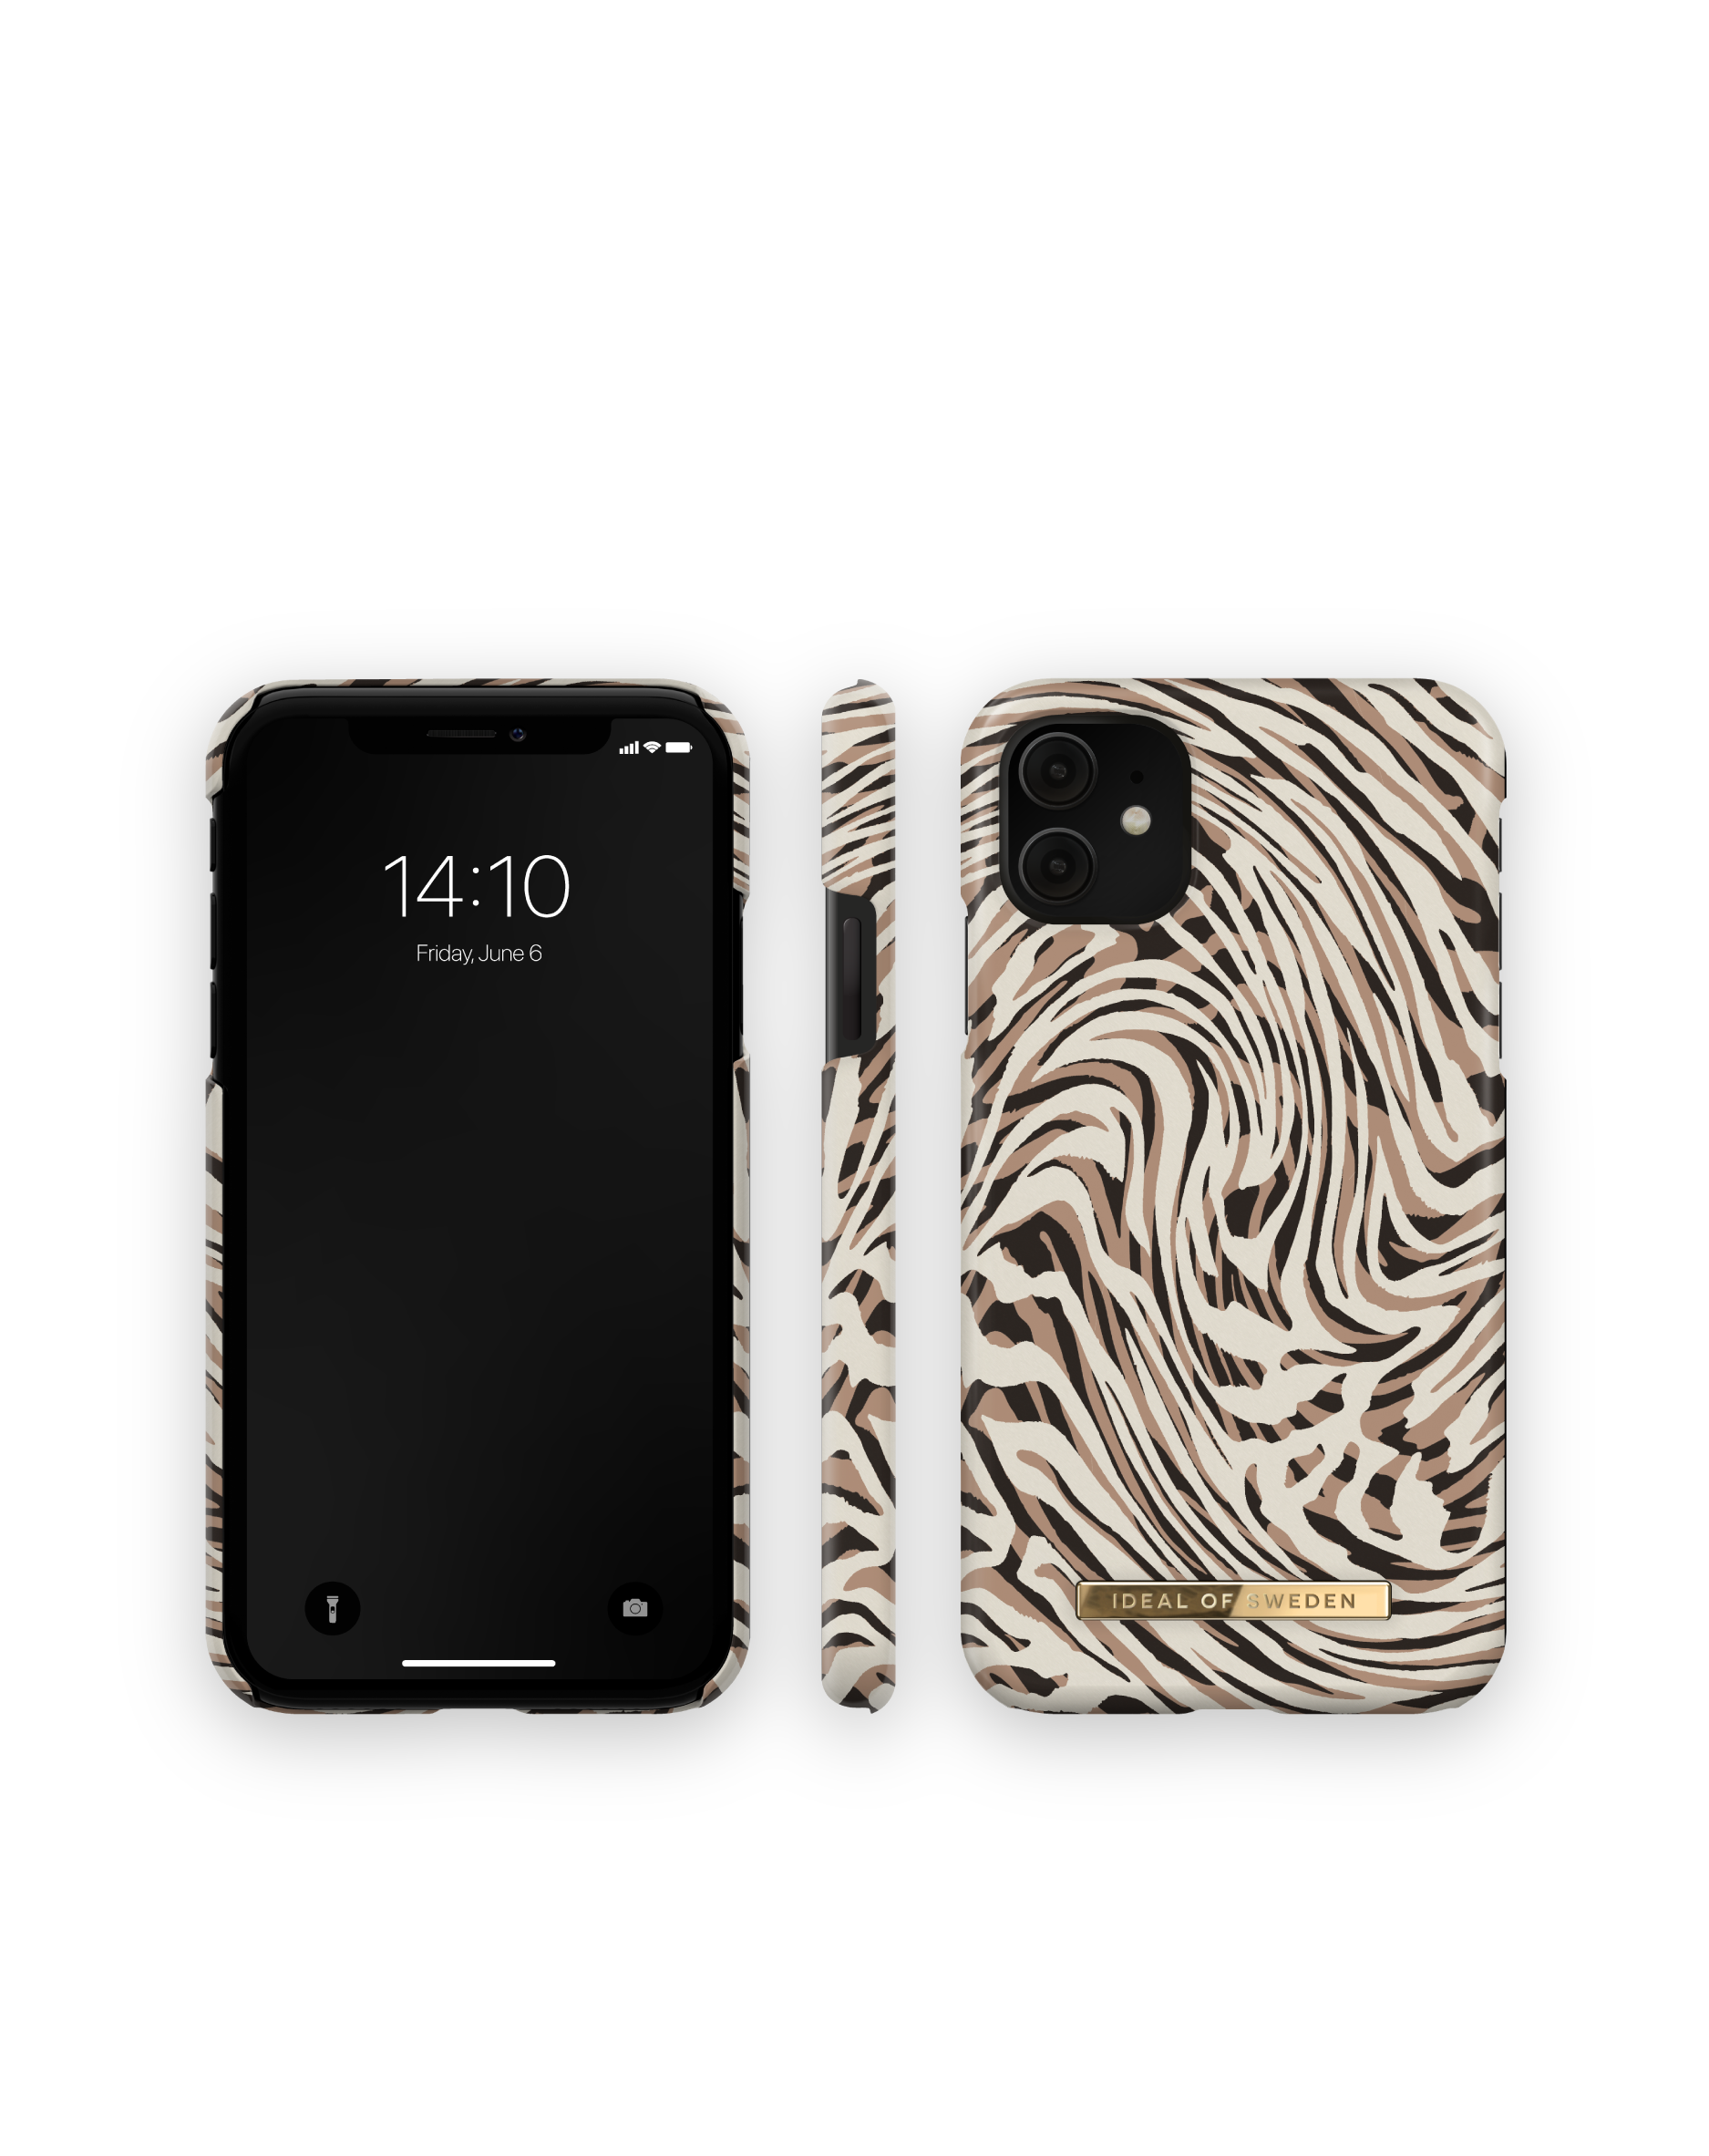 iPhone XR, OF SWEDEN Backcover, Apple, Hypnotic IDEAL iPhone Zebra / IDFCSS22-I1961-392, 11